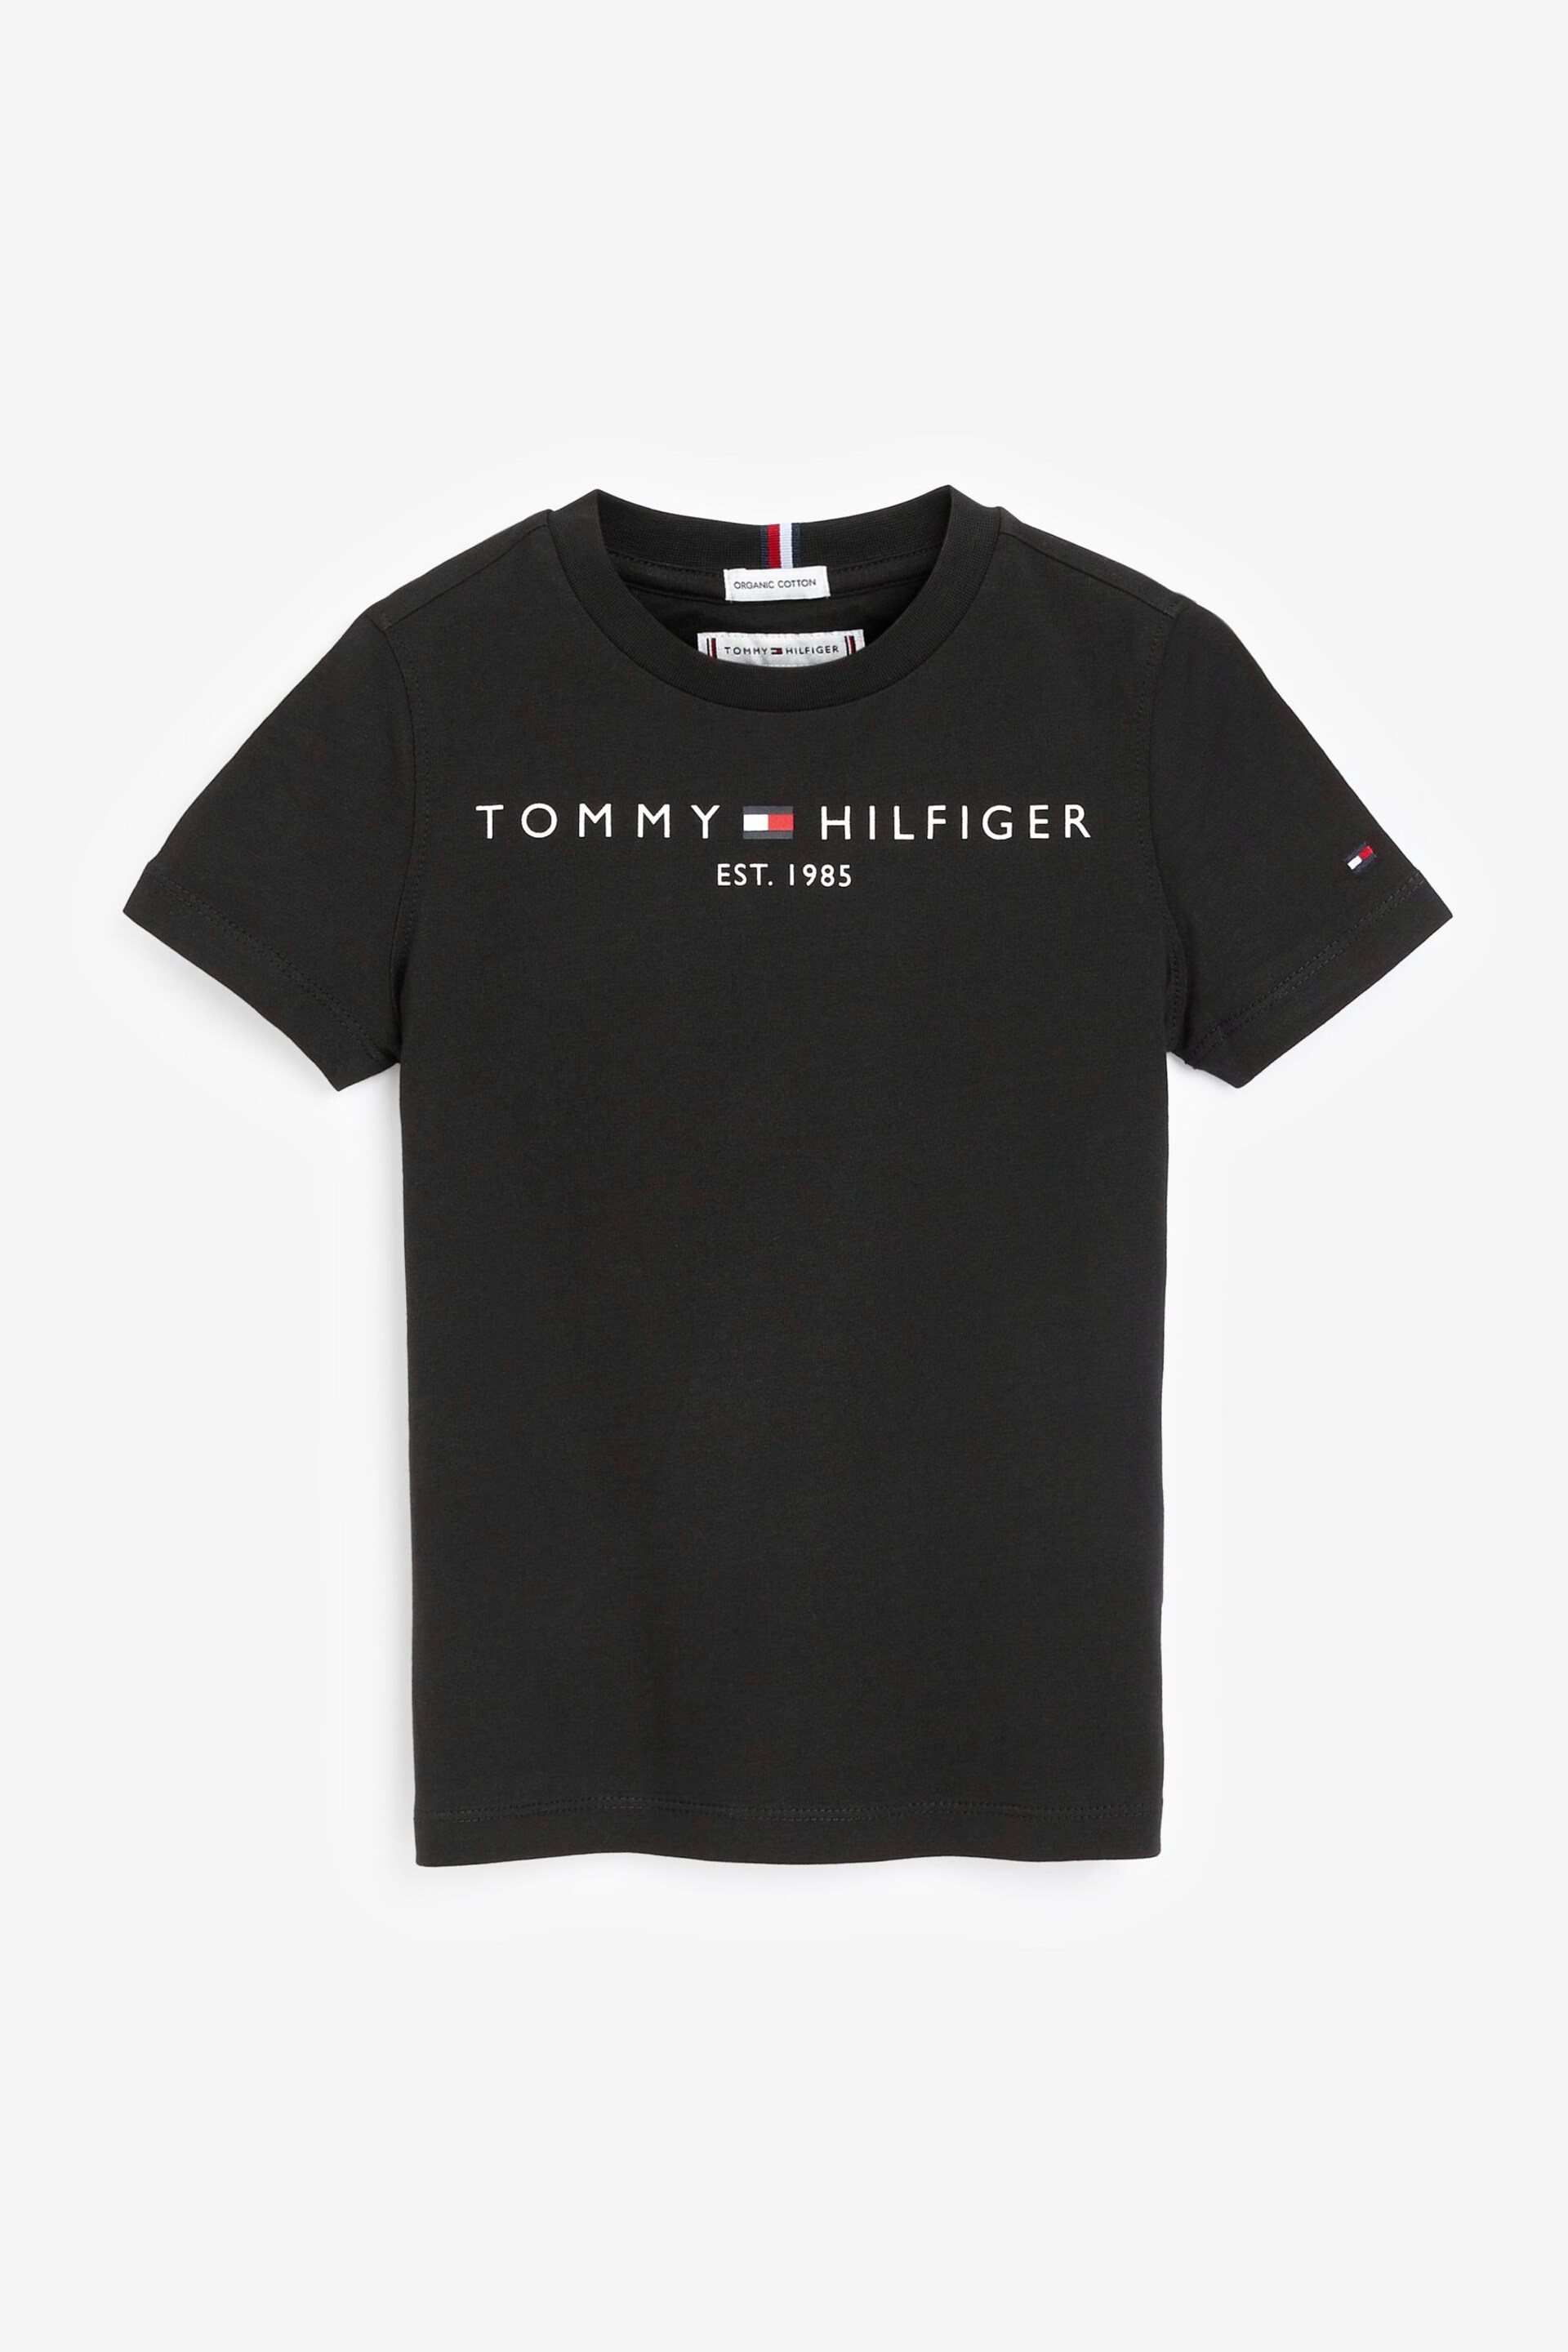 Tommy Hilfiger Essential T-Shirt - Image 3 of 3